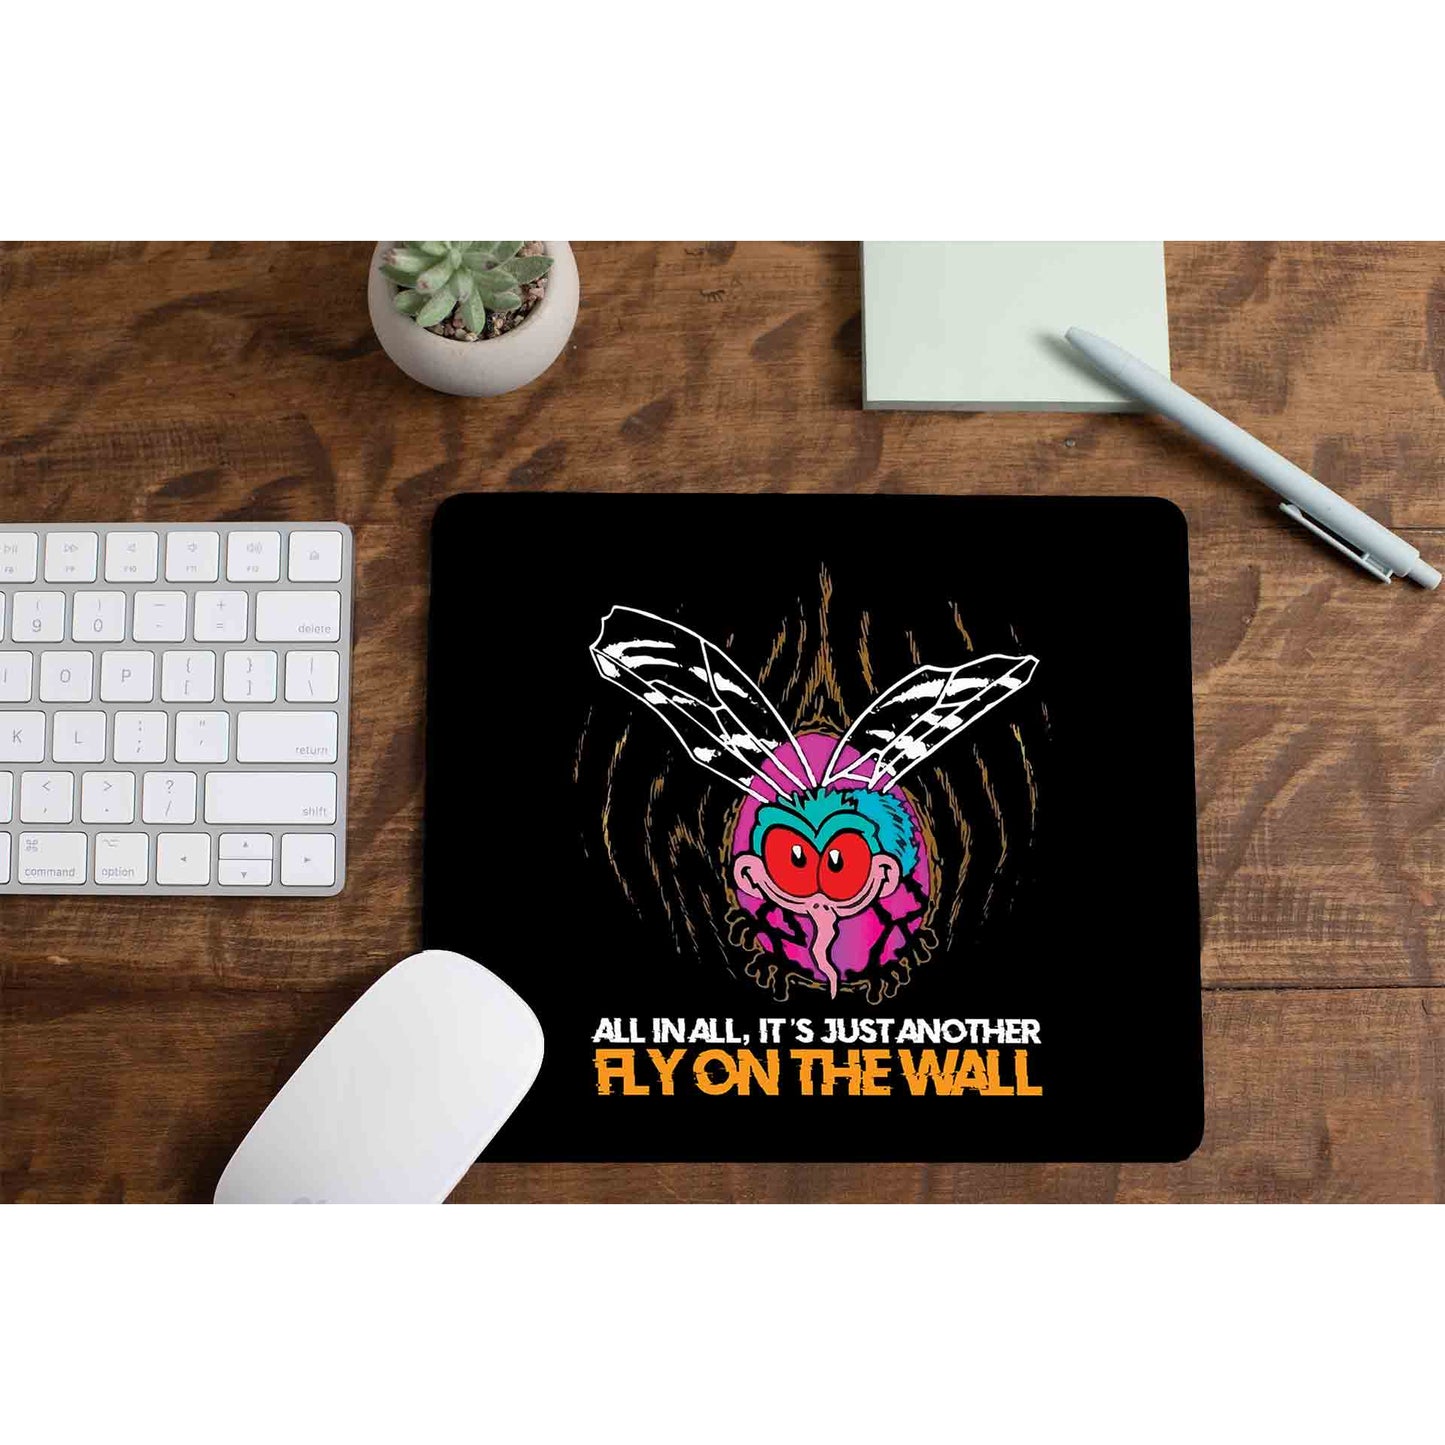 ac/dc fly on the wall mousepad logitech large anime music band buy online india the banyan tee tbt men women girls boys unisex